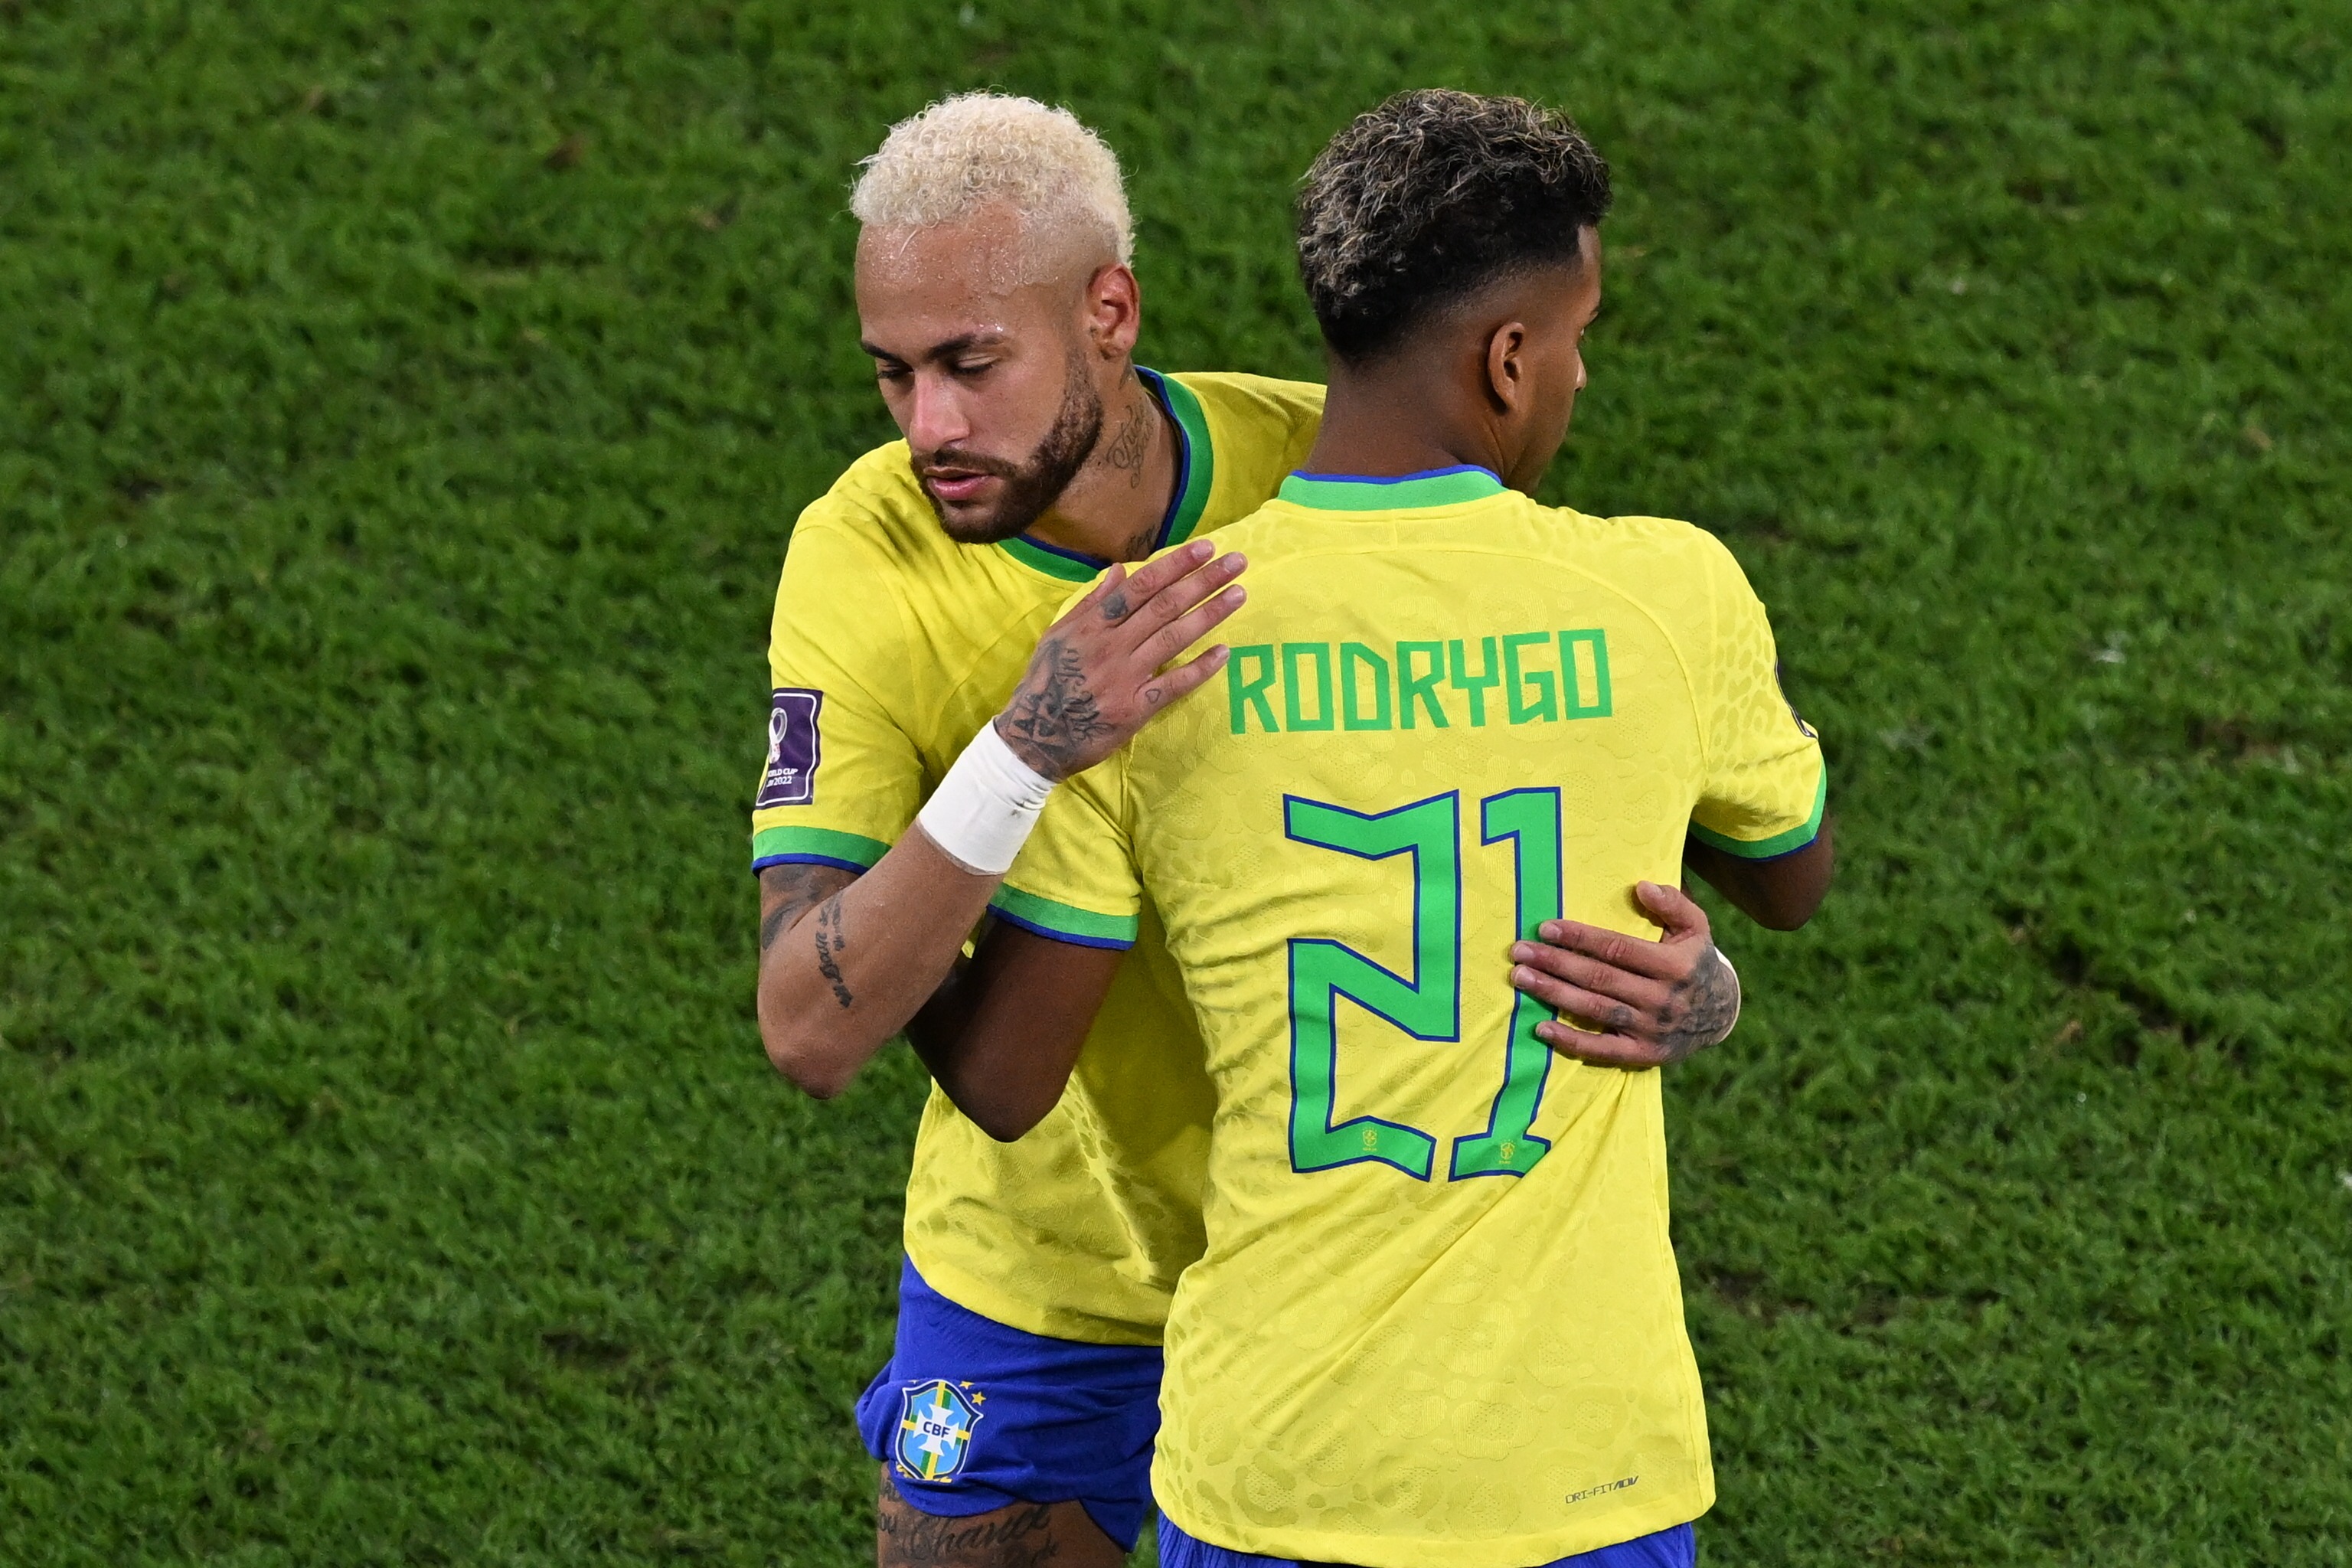 , Brazil World Cup star looks unrecognisable as young hopeful posing with idol Neymar when he was at Santos